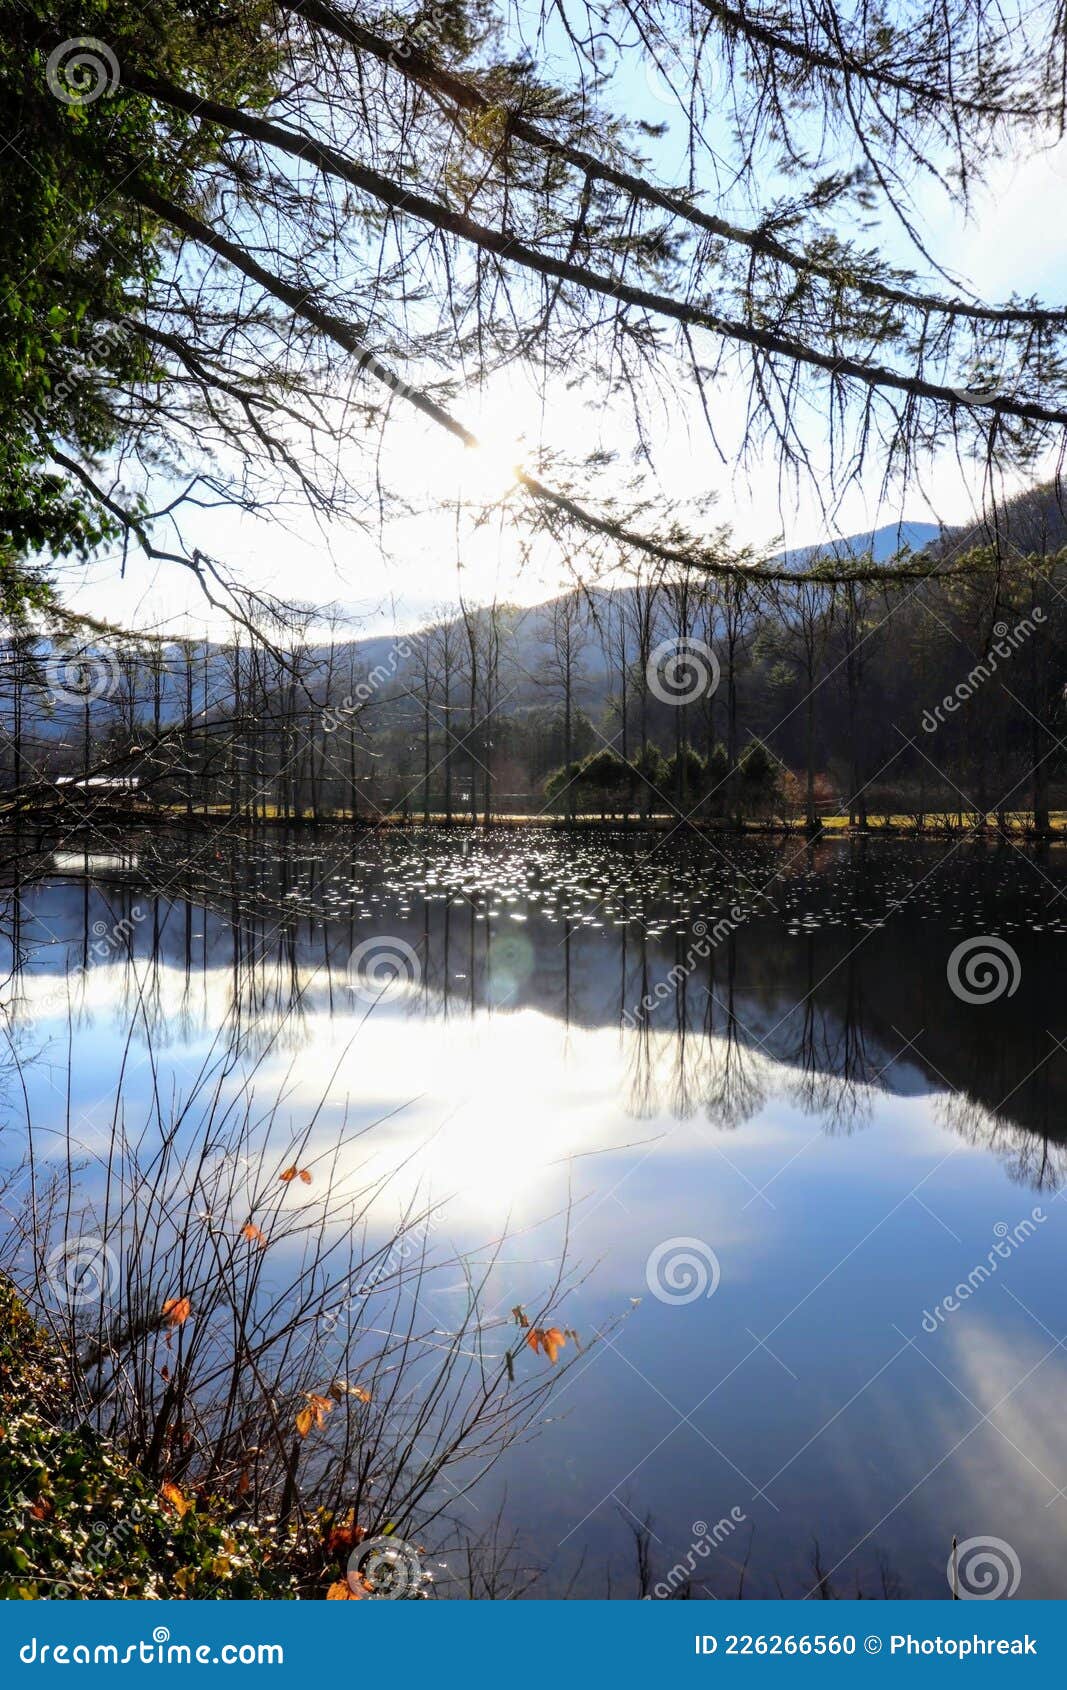 lake in mountians with reflection